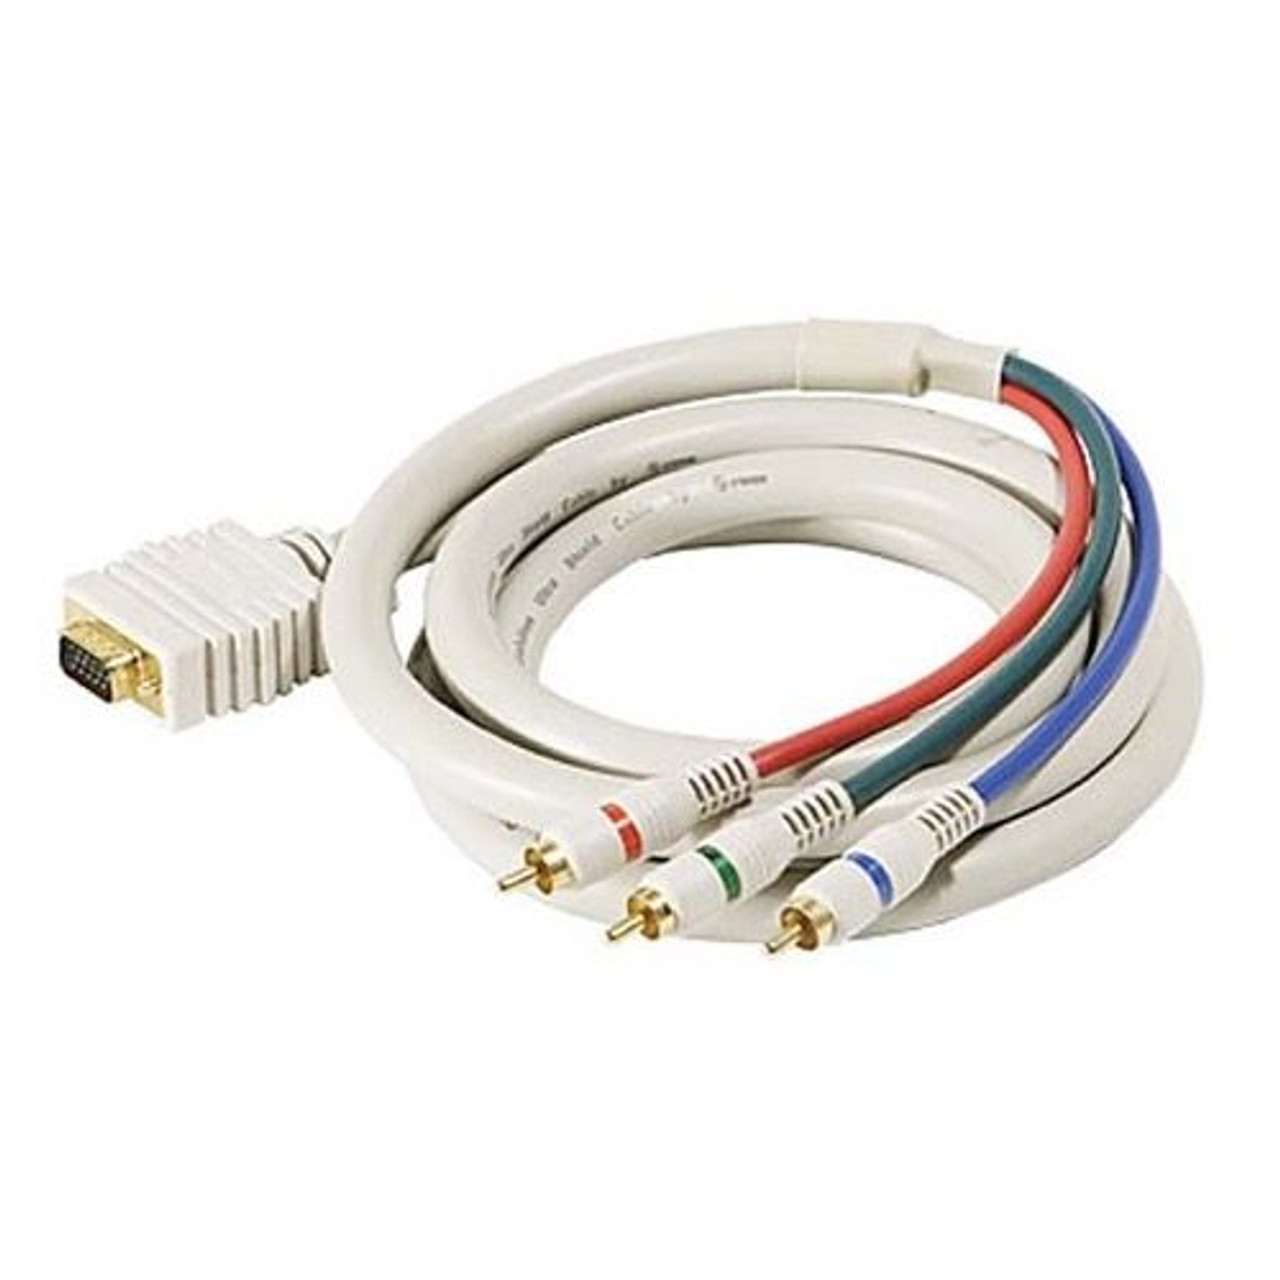 Steren 253-550IV 50' FT SVGA to RGB Component Video Cable HD-15 3-RCA Male Cable Python D-Sub HDTV Gold Component RGB Ivory 24 K Gold Plate Color Coded Double Shielded